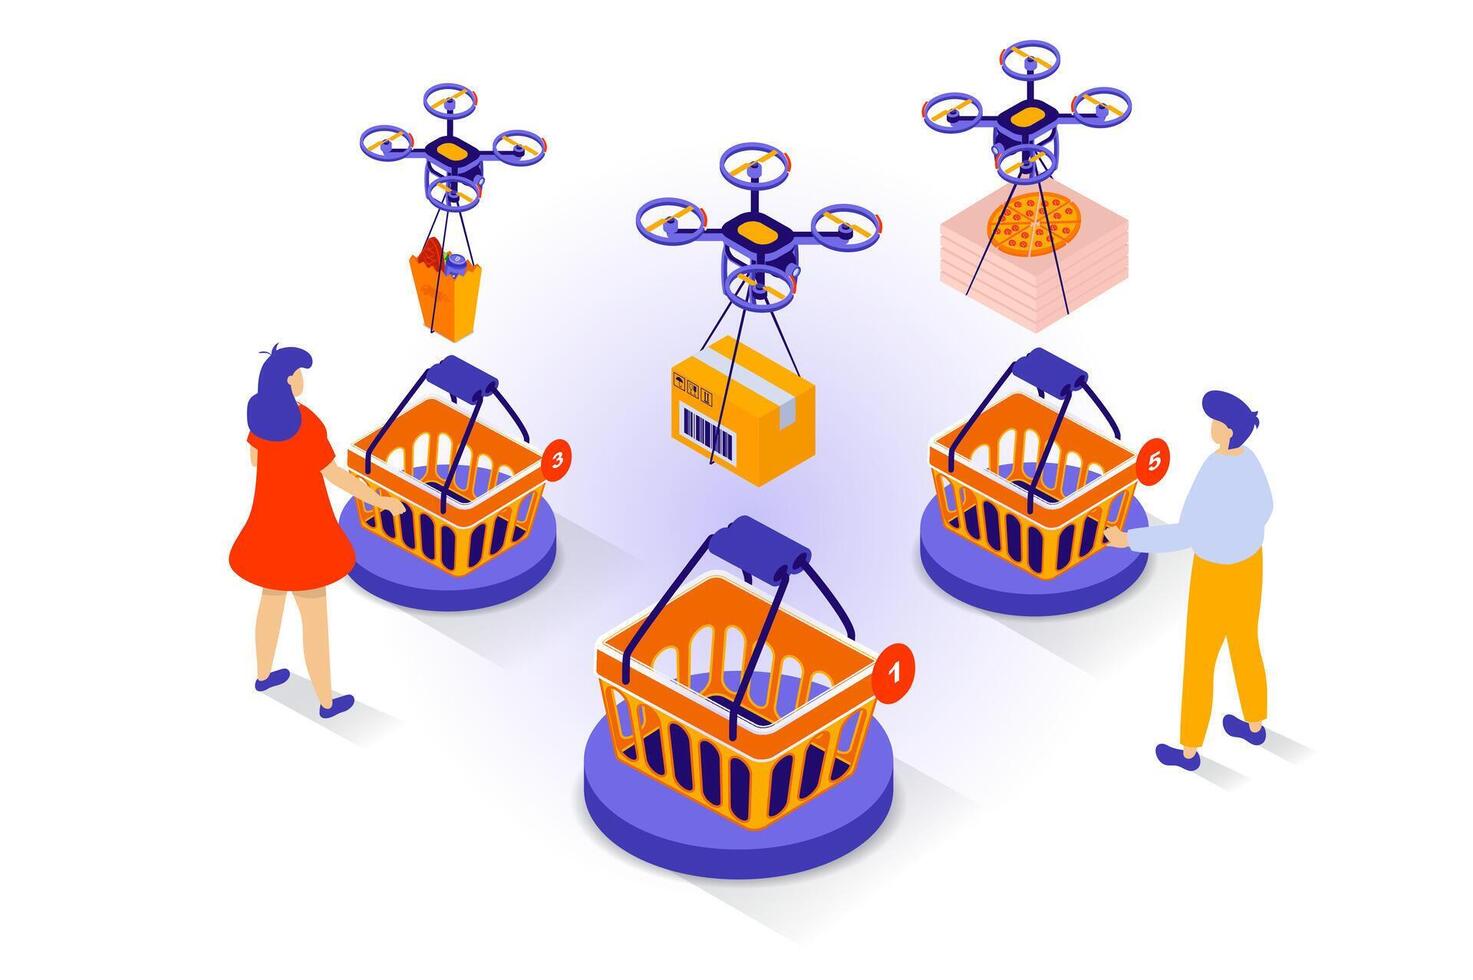 Online shopping concept in 3d isometric design. People ordering food in bag and pizza in store webpage and using delivery by flying drones. Vector illustration with isometry scene for web graphic